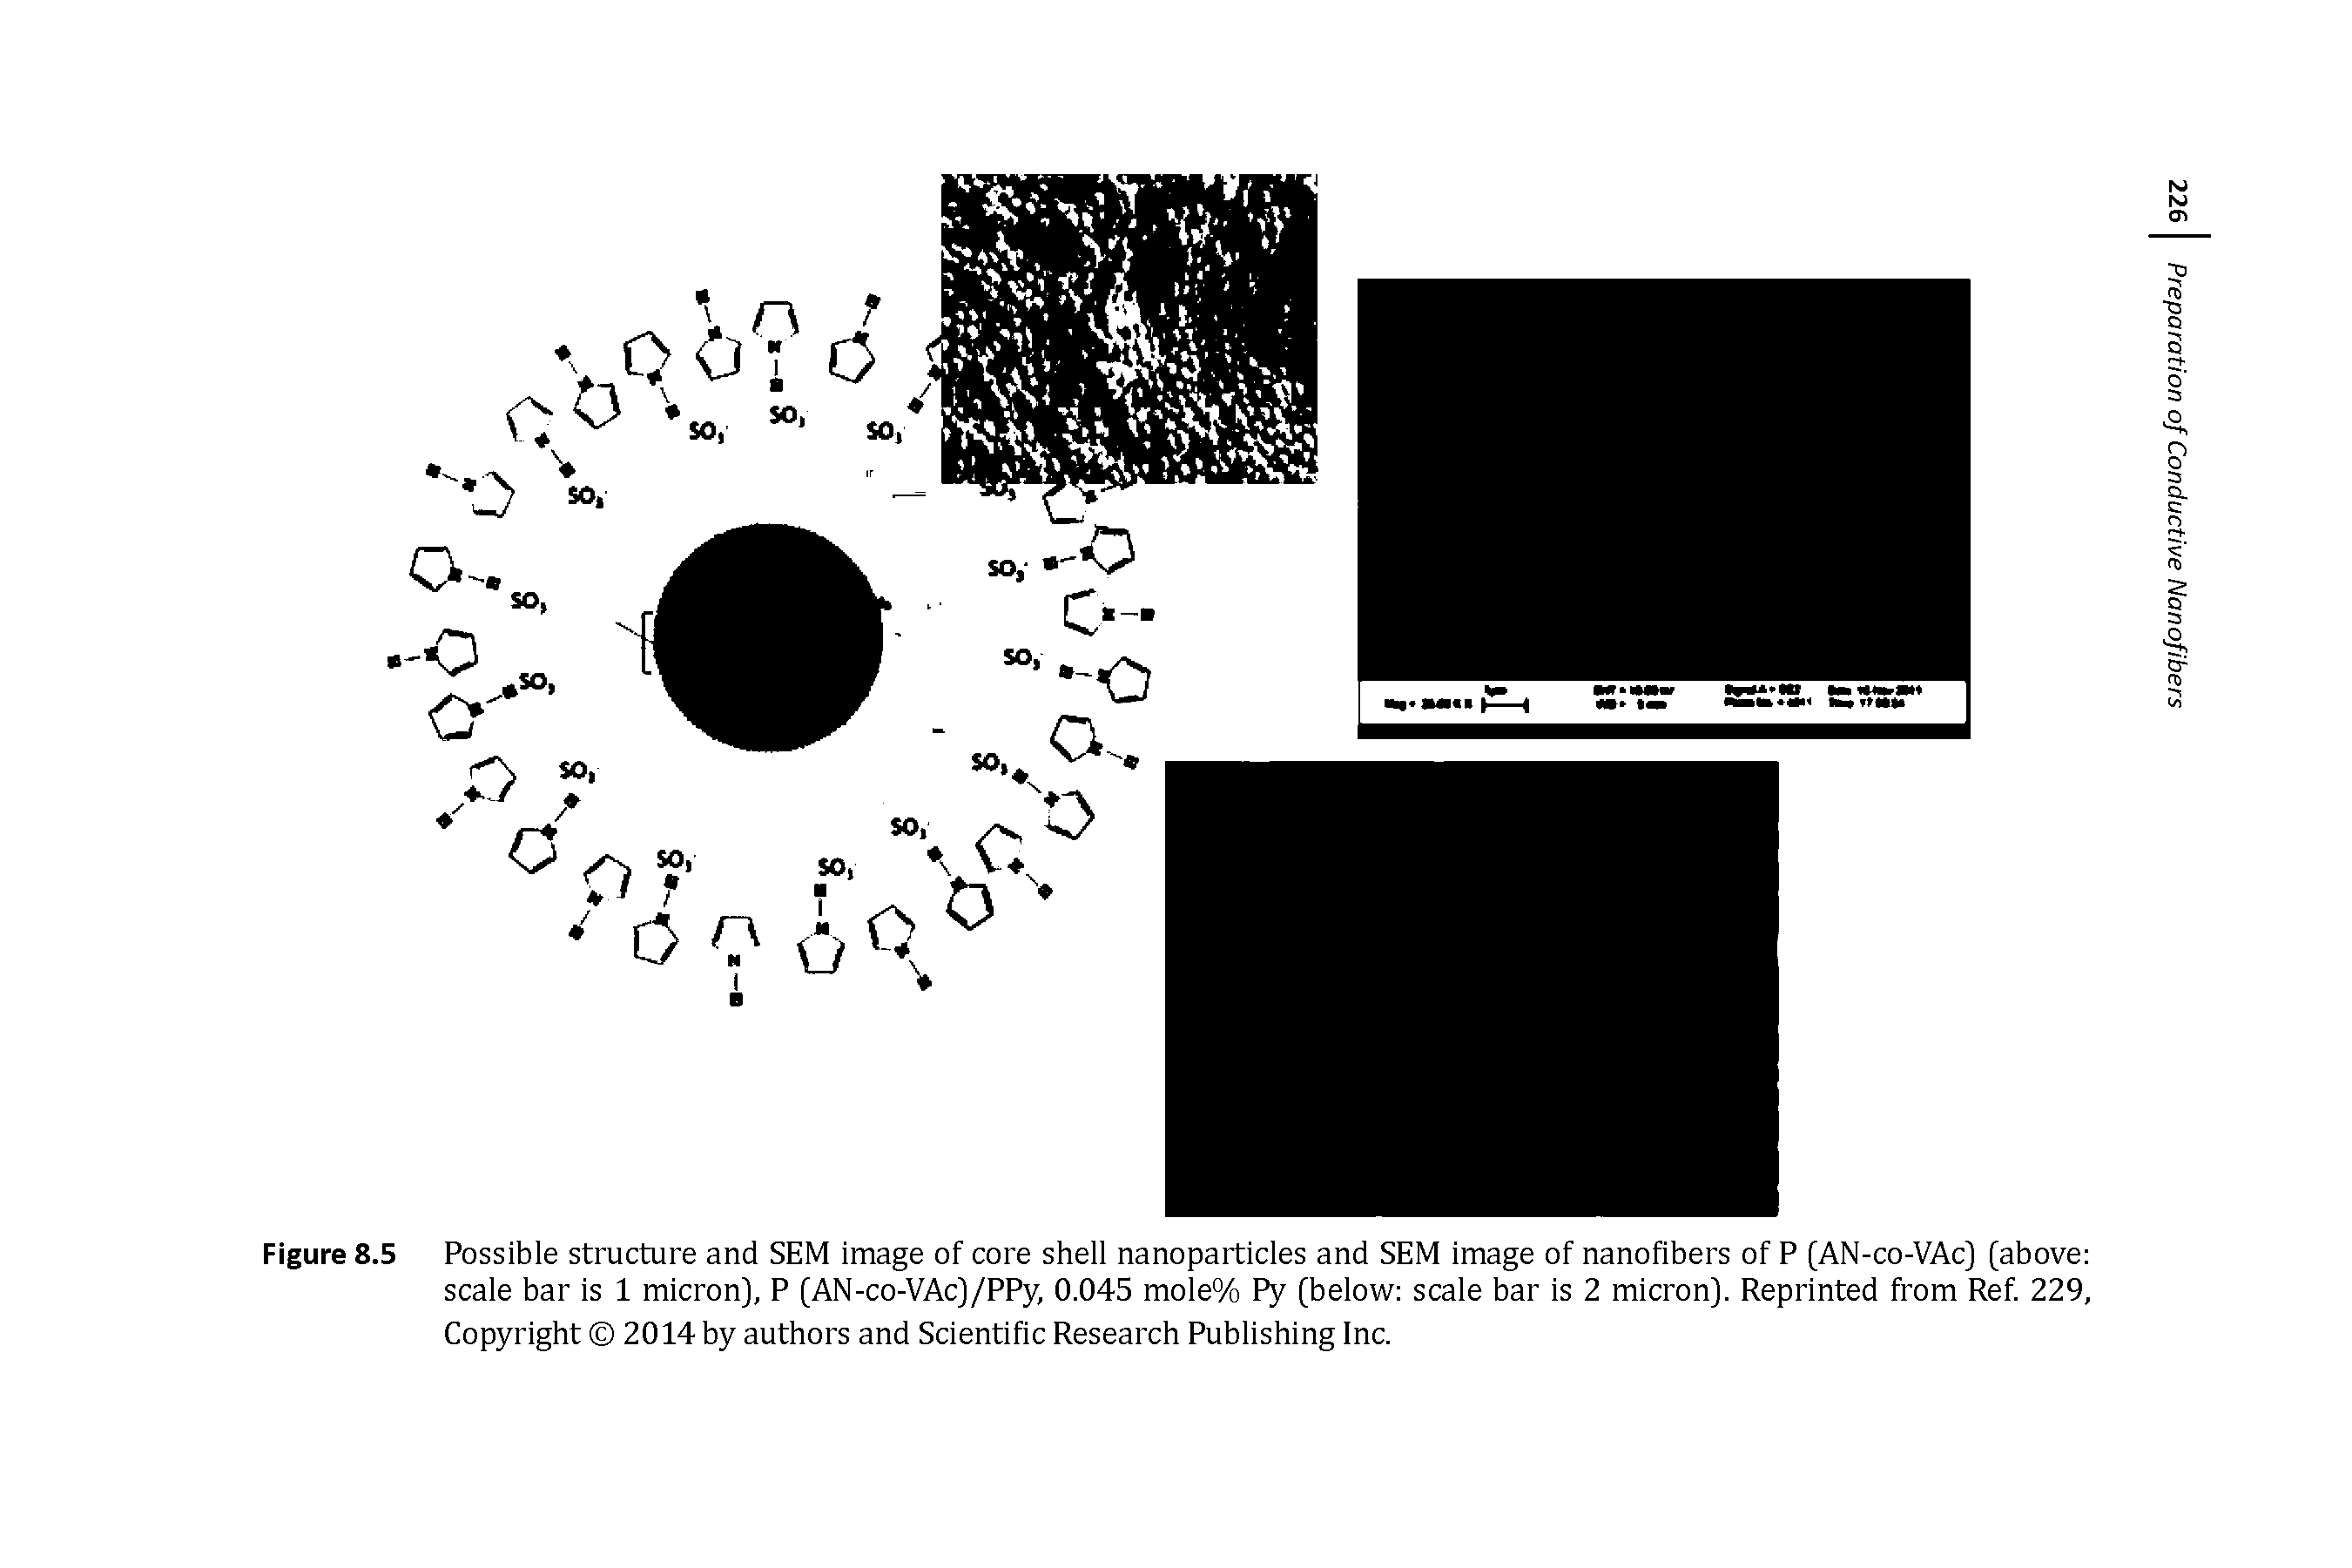 Figure 8.5 Possible structure and SEM image of core shell nanoparticles and SEM image of nanofibers of P [AN-co-VAc] [above scale bar is 1 micron], P [AN-co-VAc]/PPy, 0.045 mole% Py [below scale bar is 2 micron]. Reprinted from Ref 229, Copyright 2014 by authors and Scientific Research Publishing Inc.